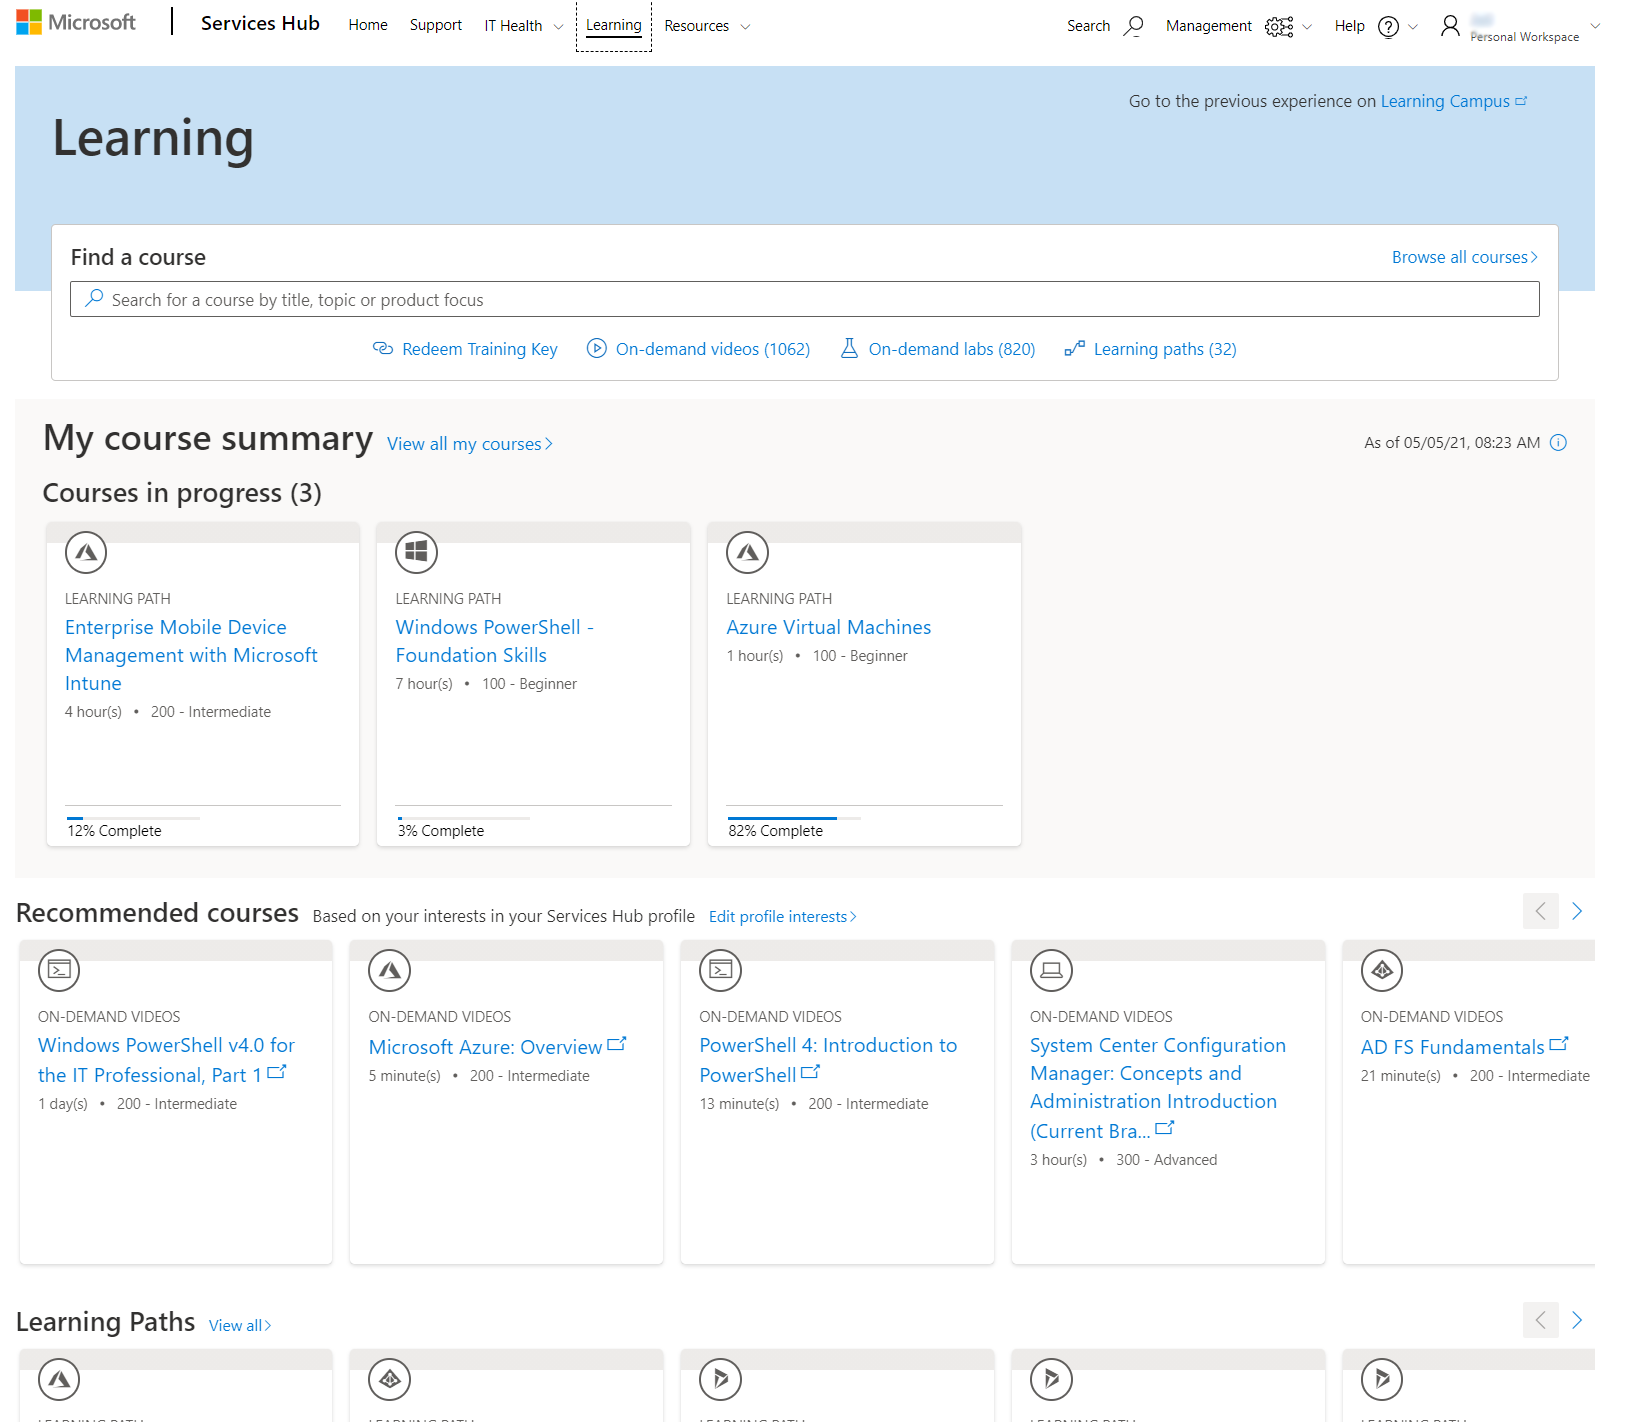 Updated design on the Learning landing page